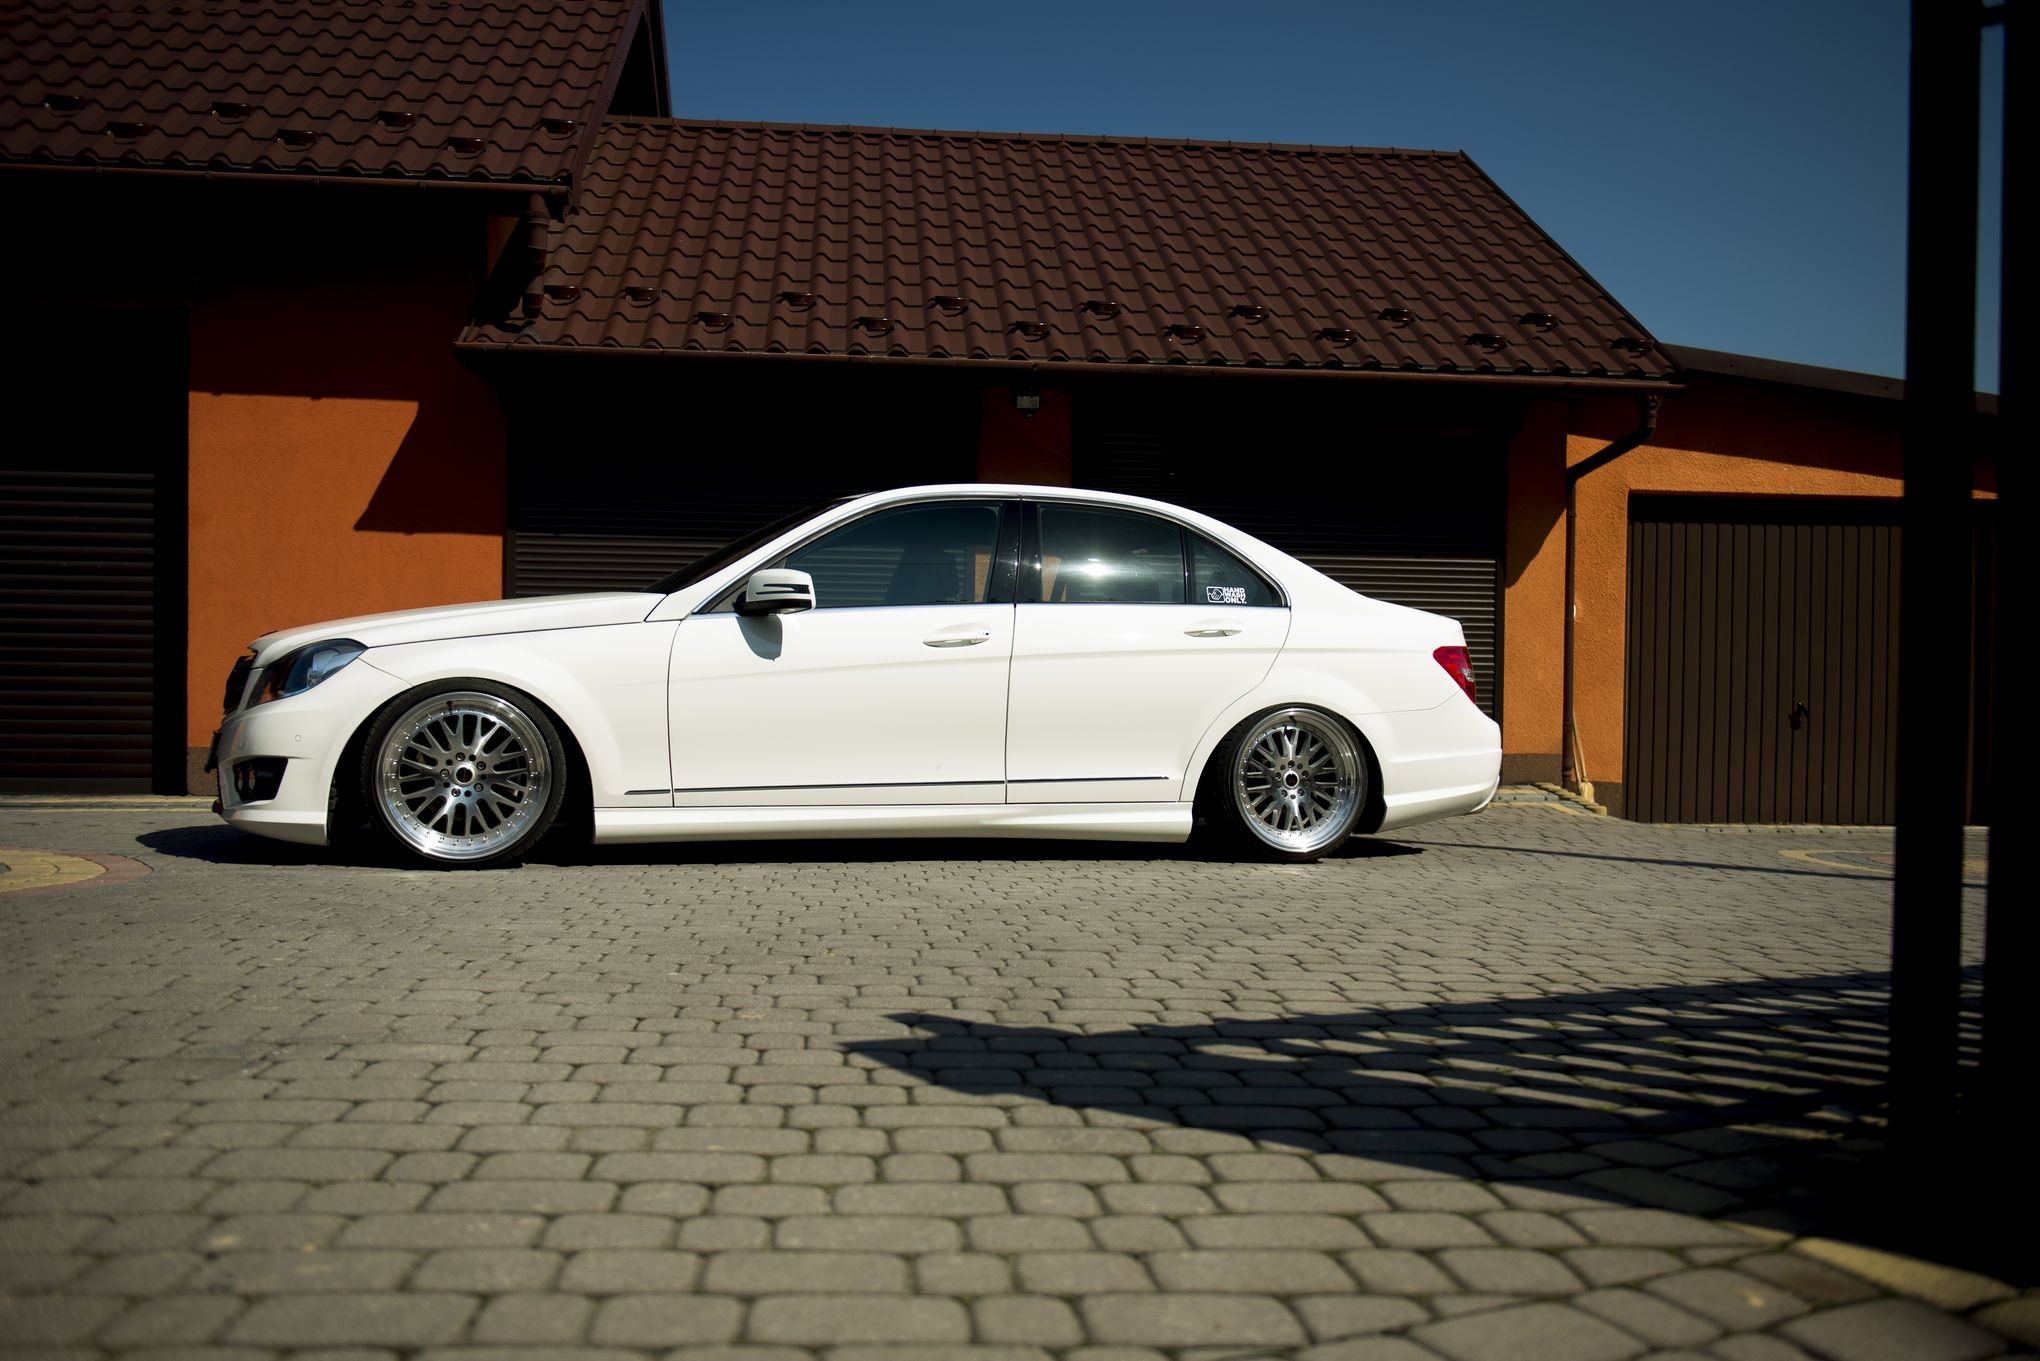 Aftermarket Side Skirts on White Mercedes C Class - Photo by JR Wheels